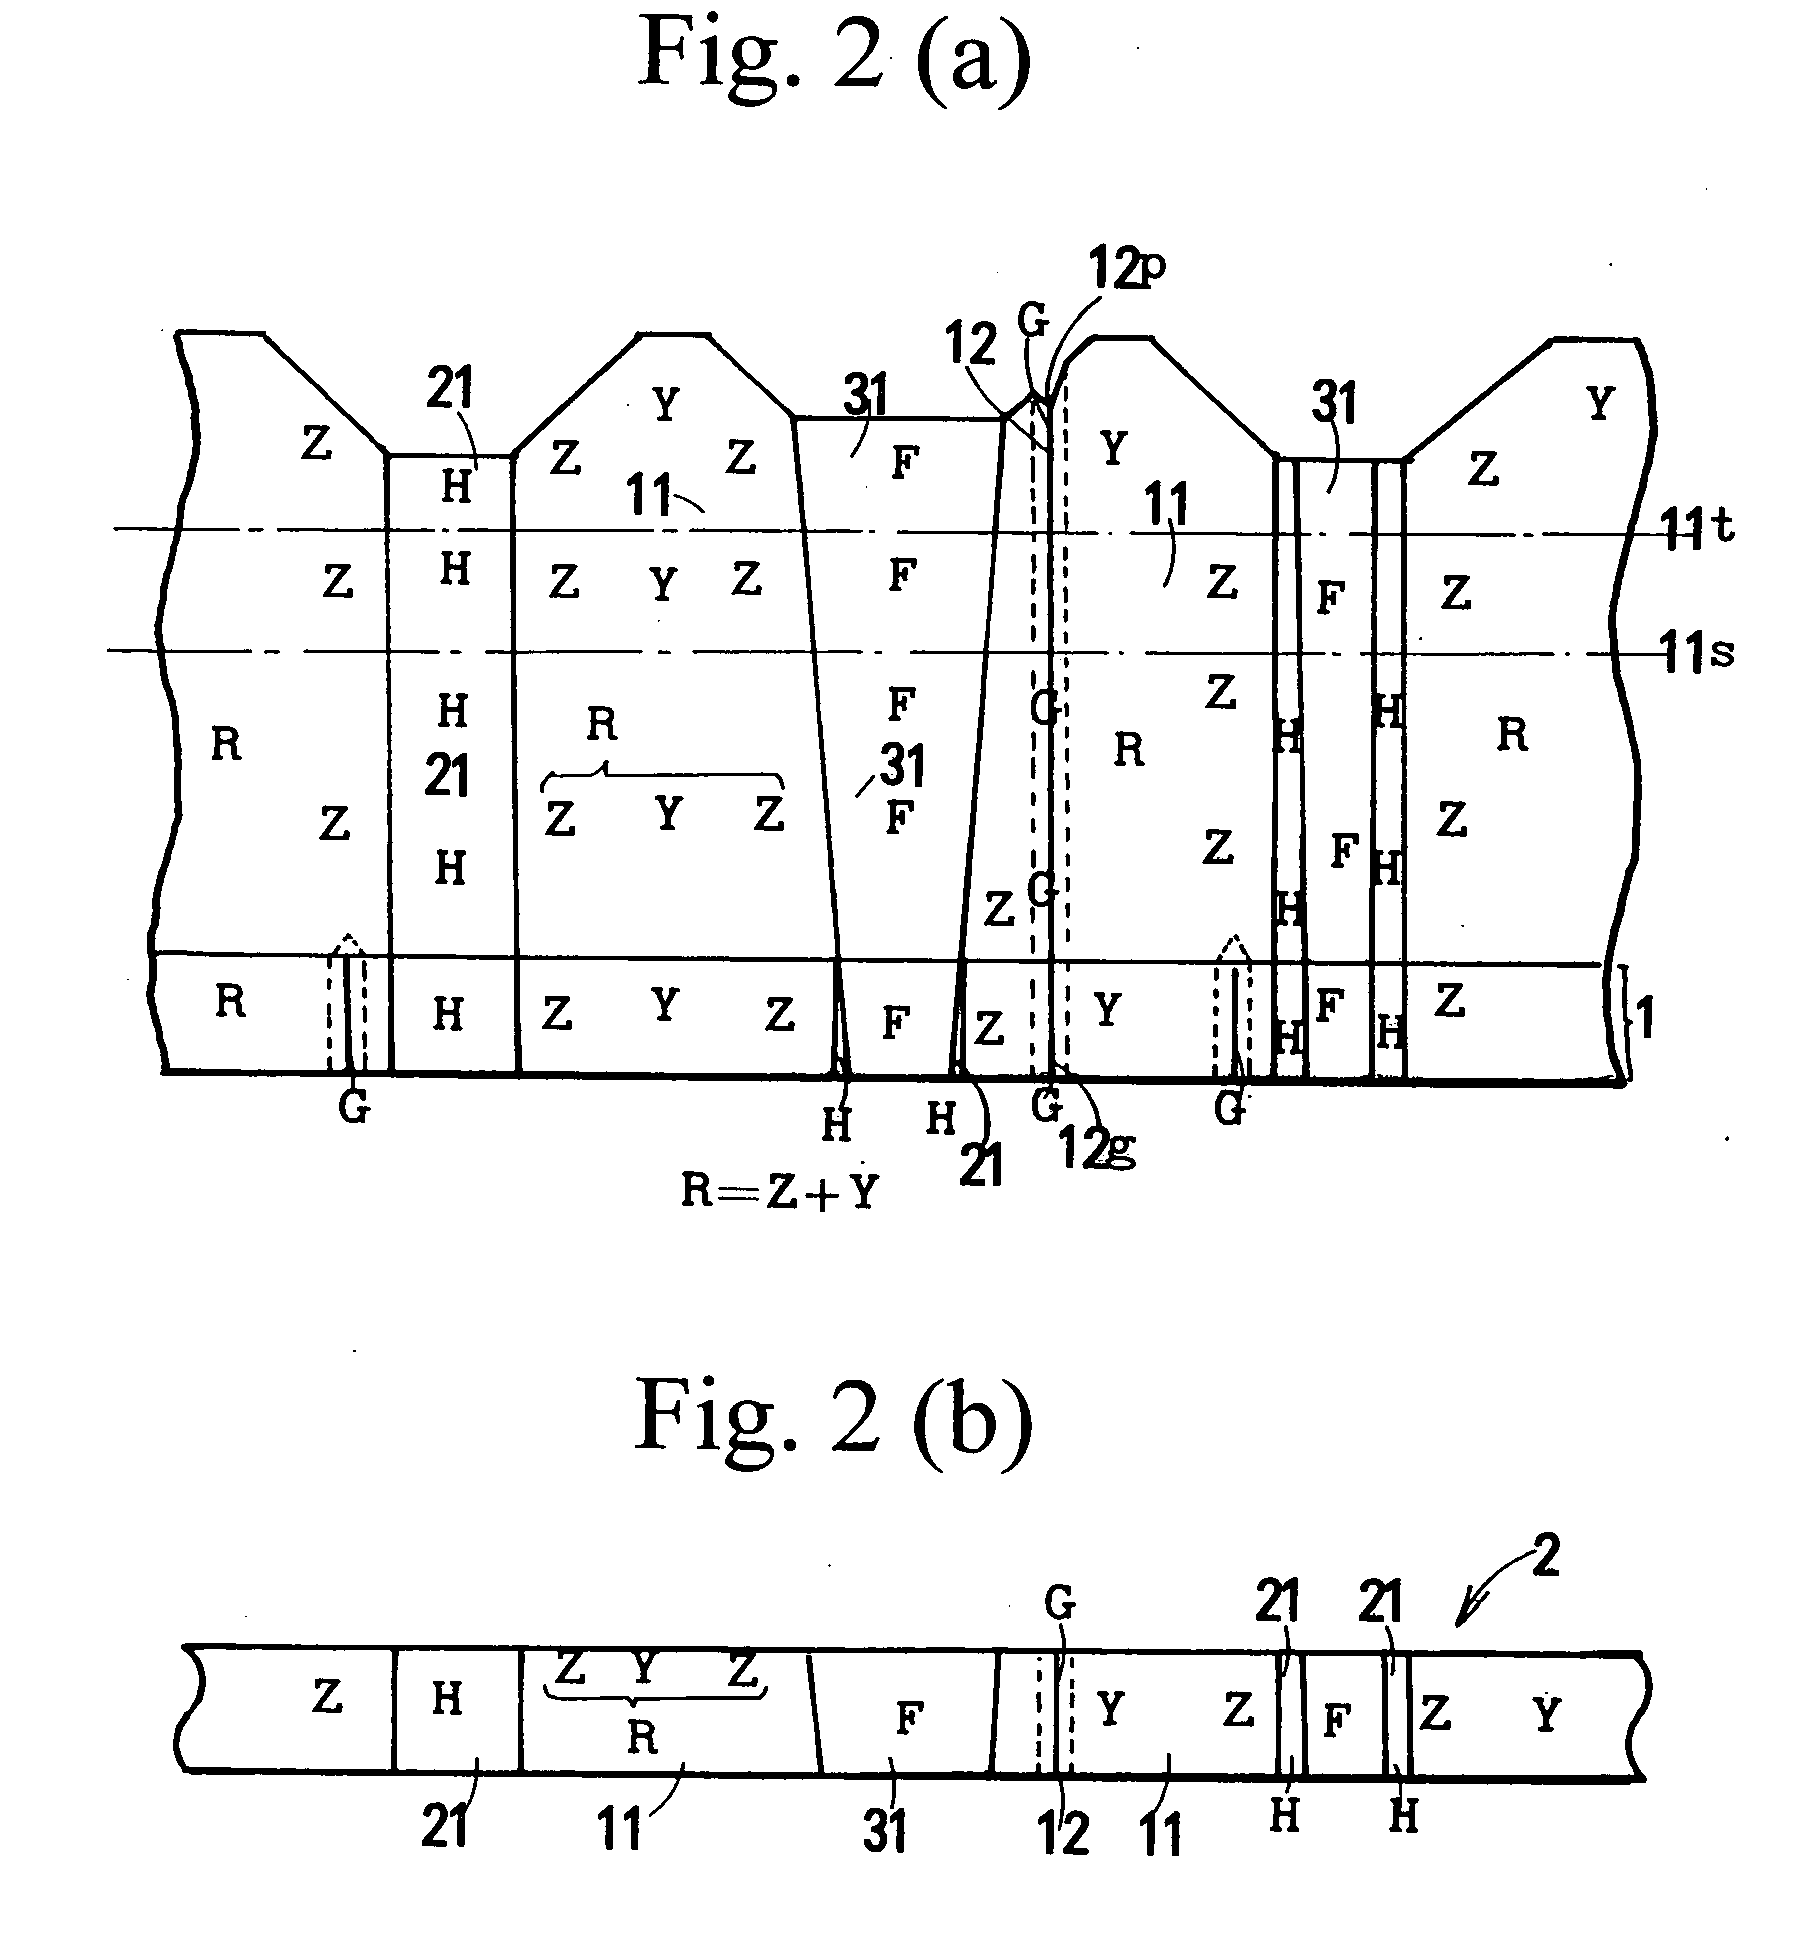 Gallium nitride crystal substrate and method of producing same